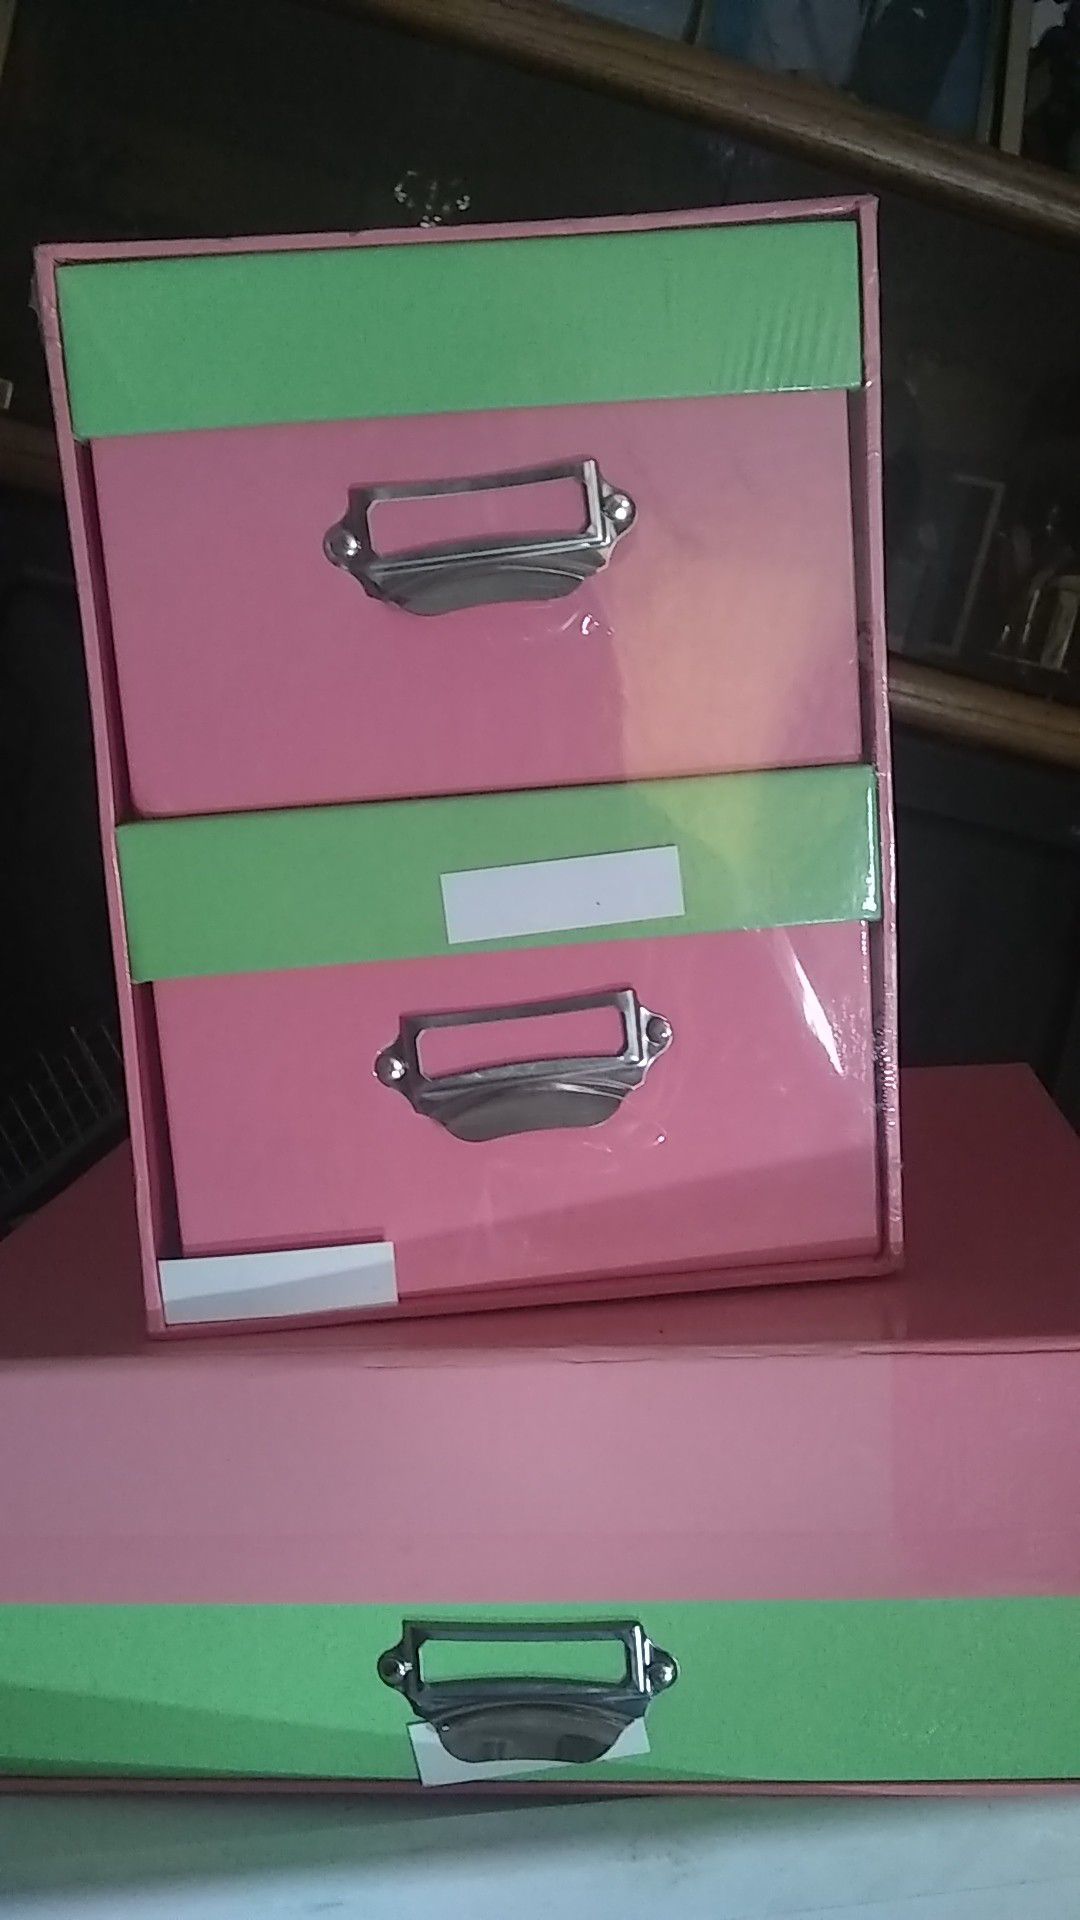 $6! Both 2 medium two tone pink boxes good for swords for kids on the dresser or the vanity plenty of room for pencils pens paper